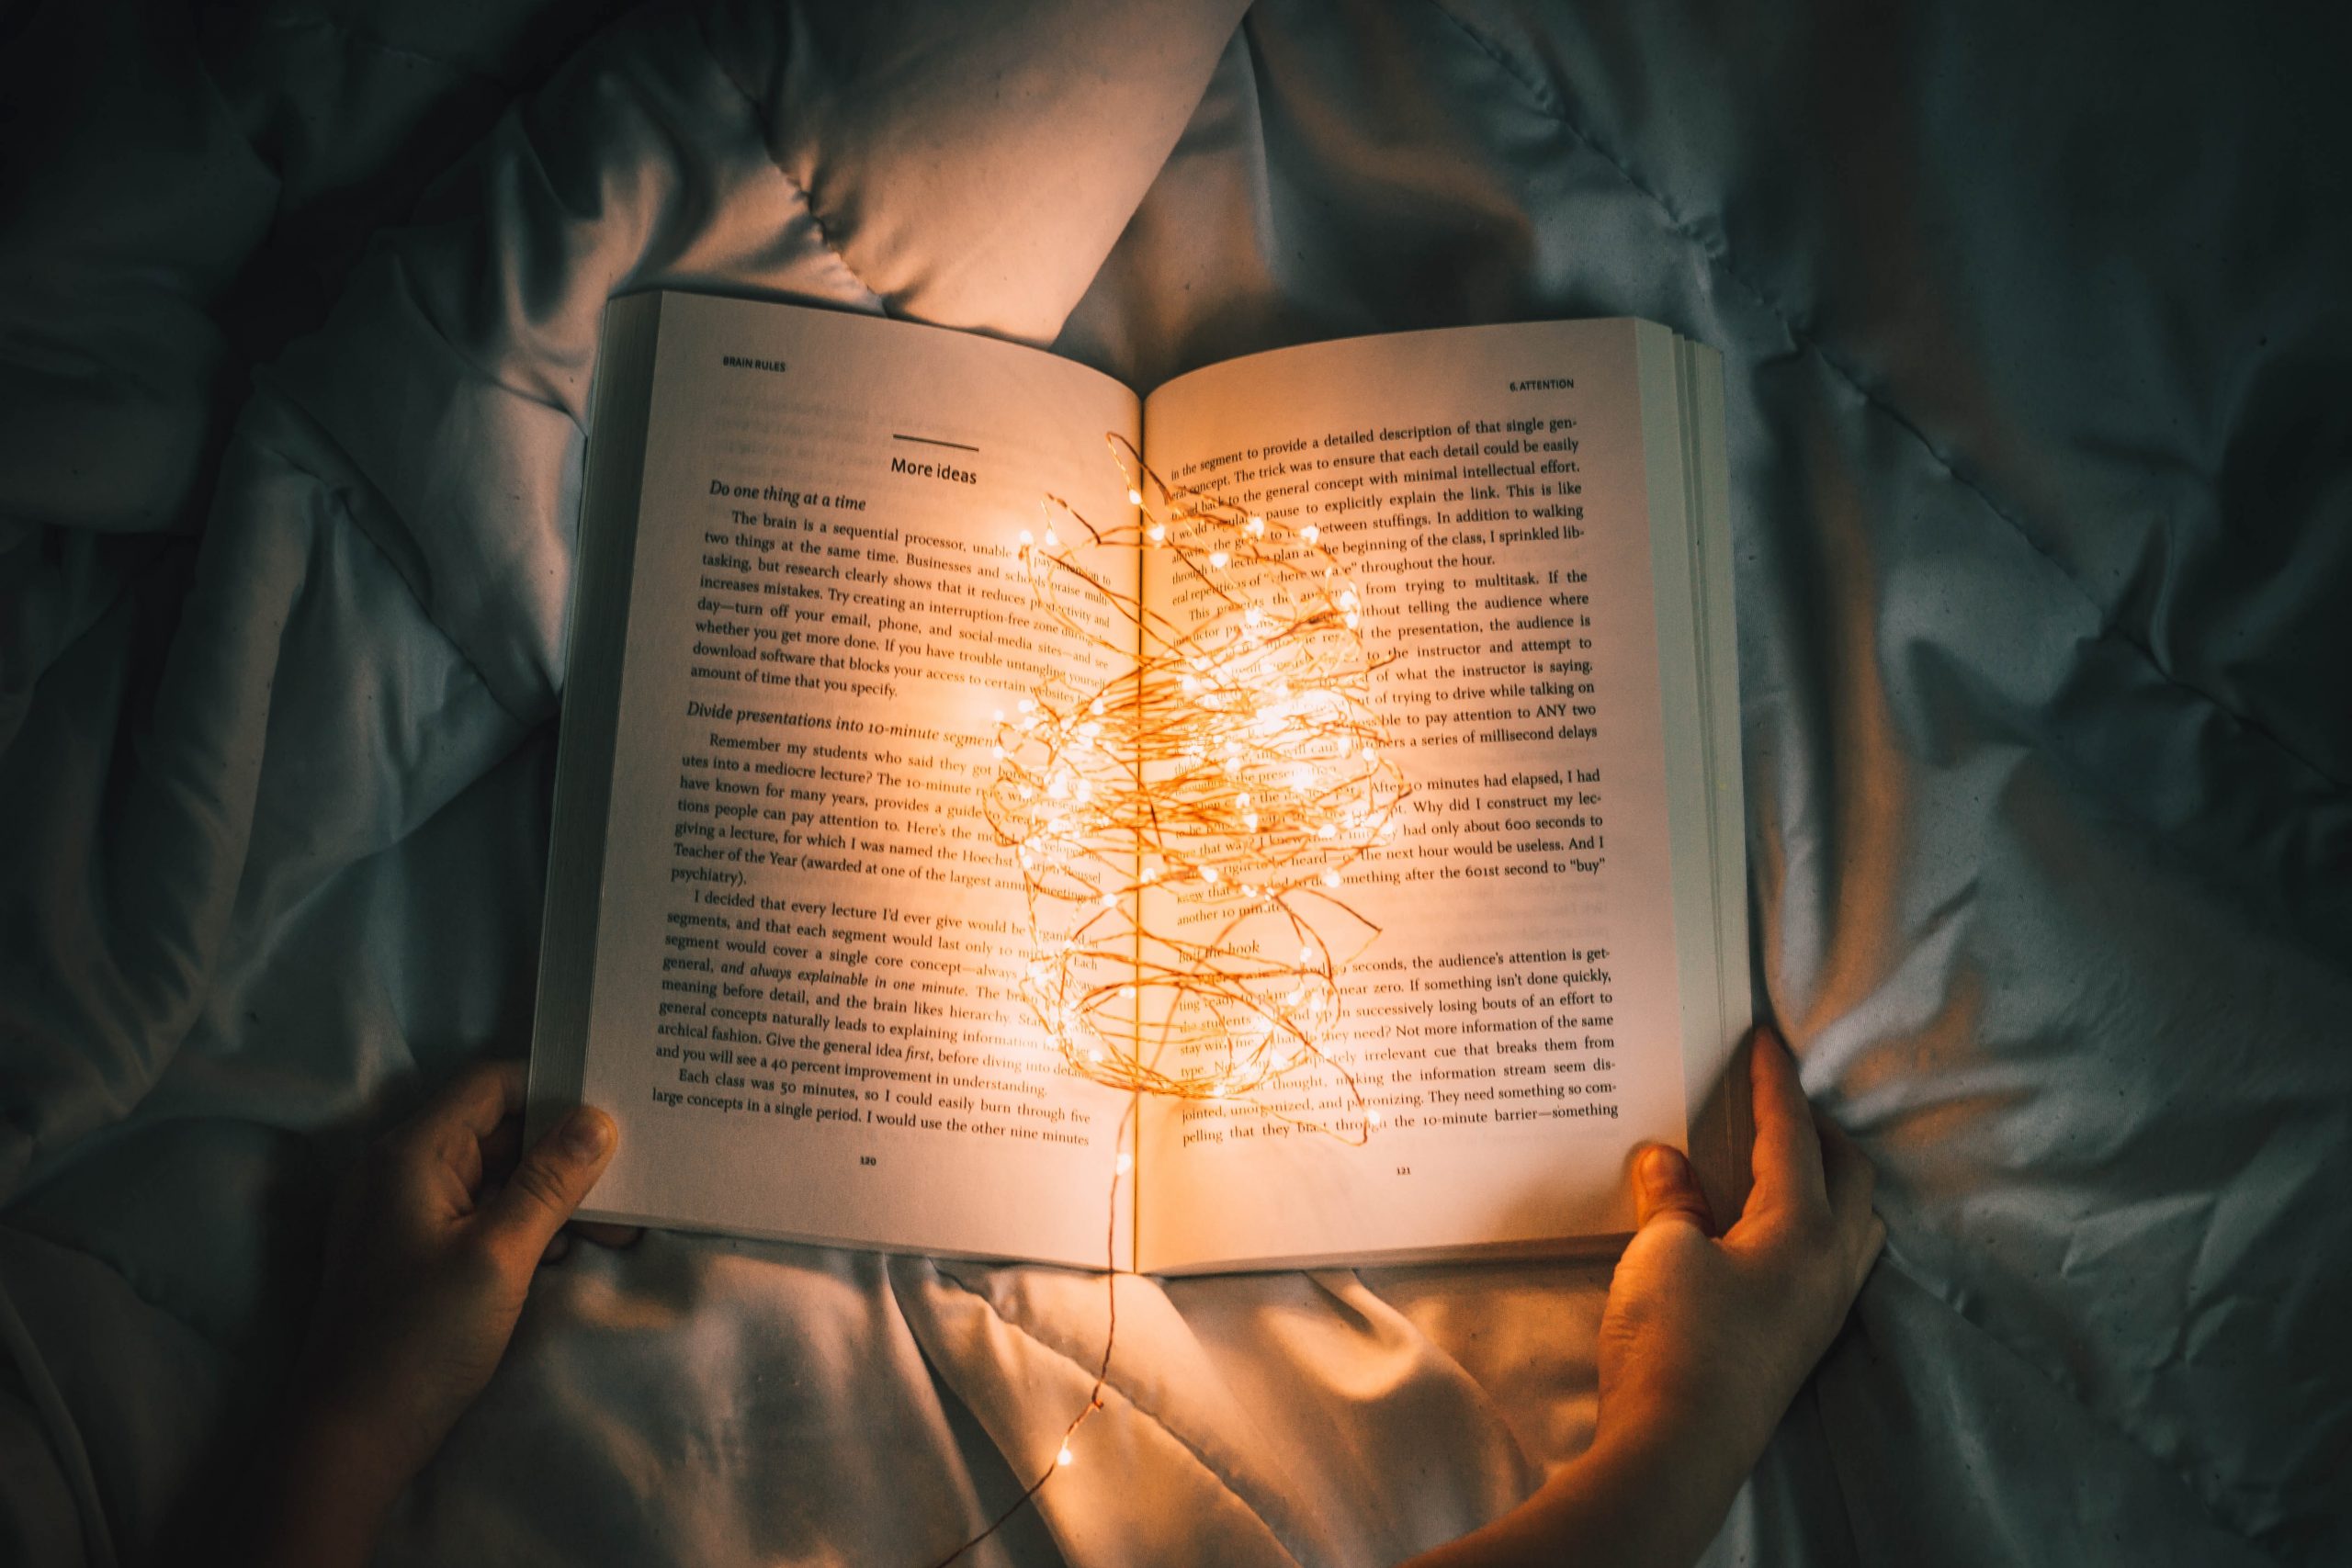 open book on the comforter of a bed with two hands holding it open. It has small string lights sitting in the center of the book, lighting up the words on the page, contrasting with the dim lighting surrounding it